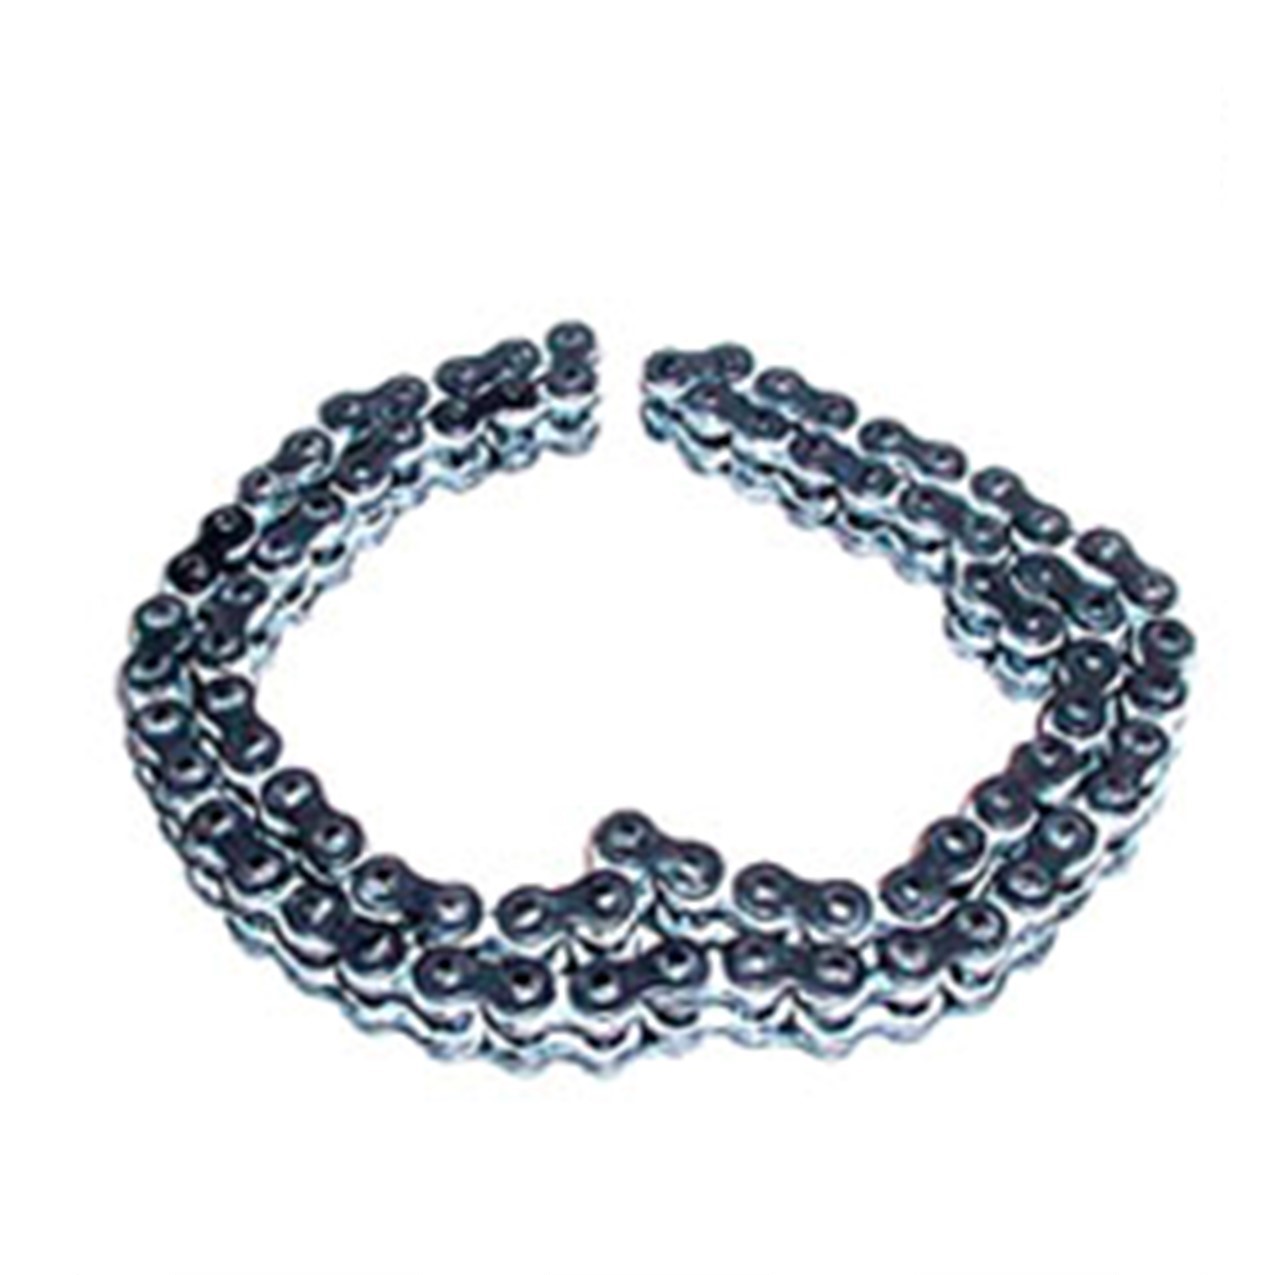 Chain #520 X 78 Links with Master Link Fits E-Ton Yukon YXL 150, CXL150, RXL150R ATVs + others